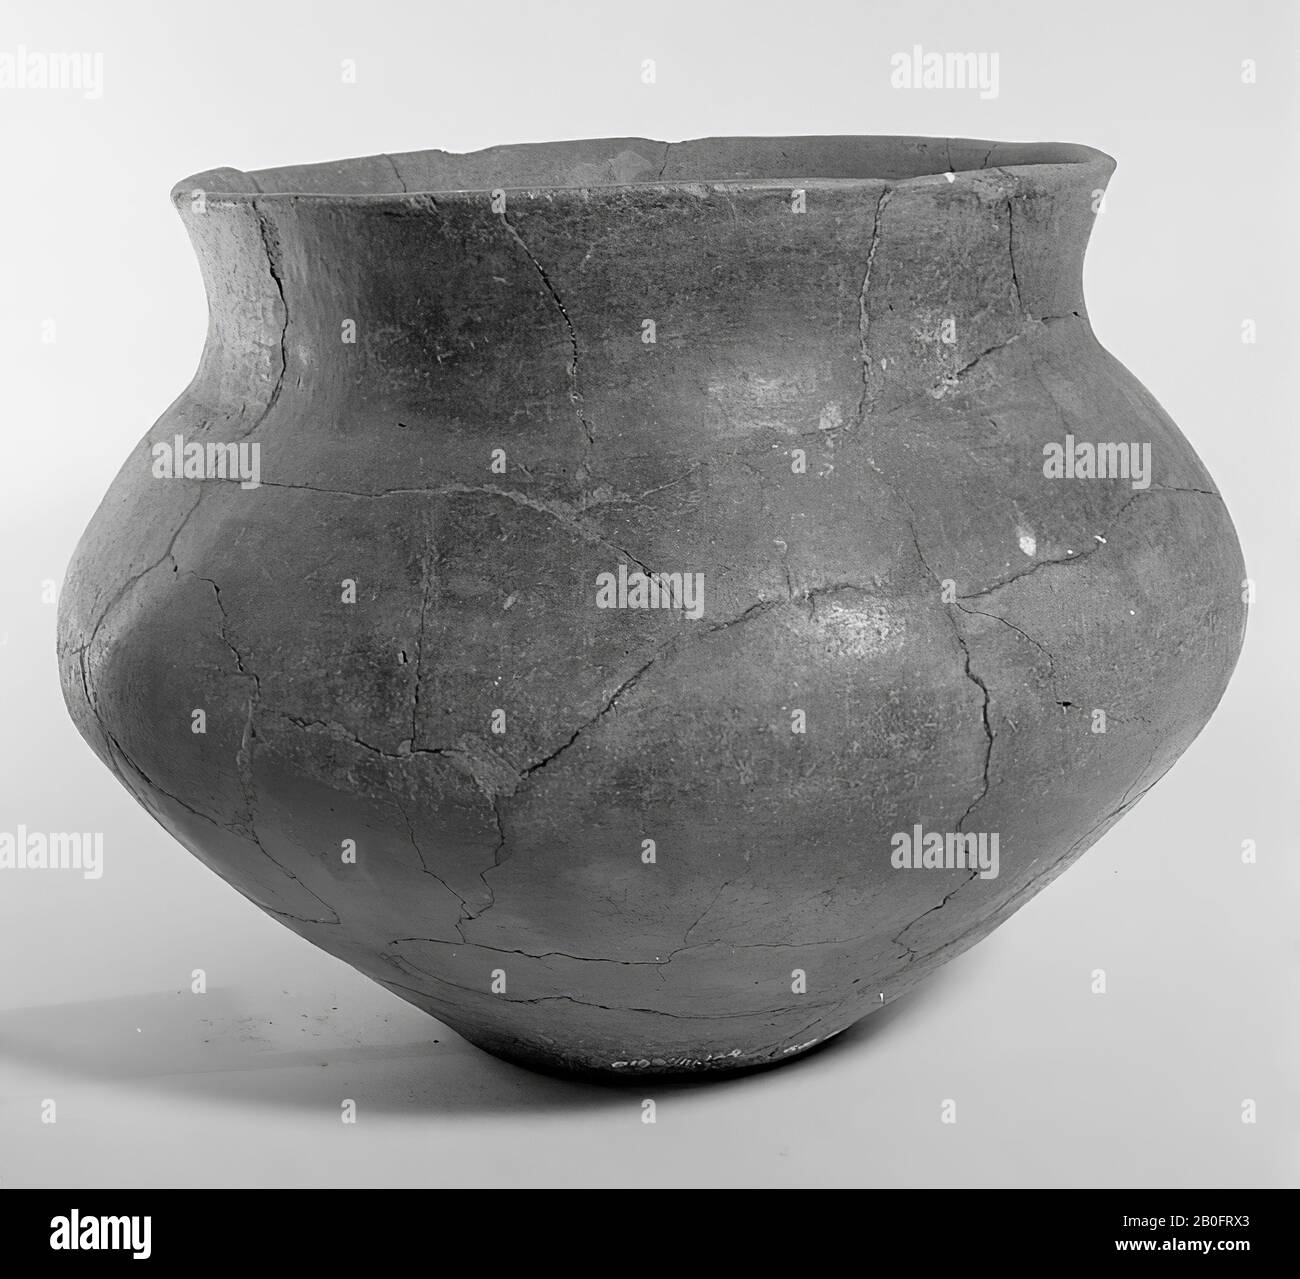 Large Hallstatt-urn of earthenware without decoration. Old bondings and additions. Contains cremated residues, urn, earthenware, h: 20.6 cm, diam: 28.7 cm, prehistory -800 Stock Photo